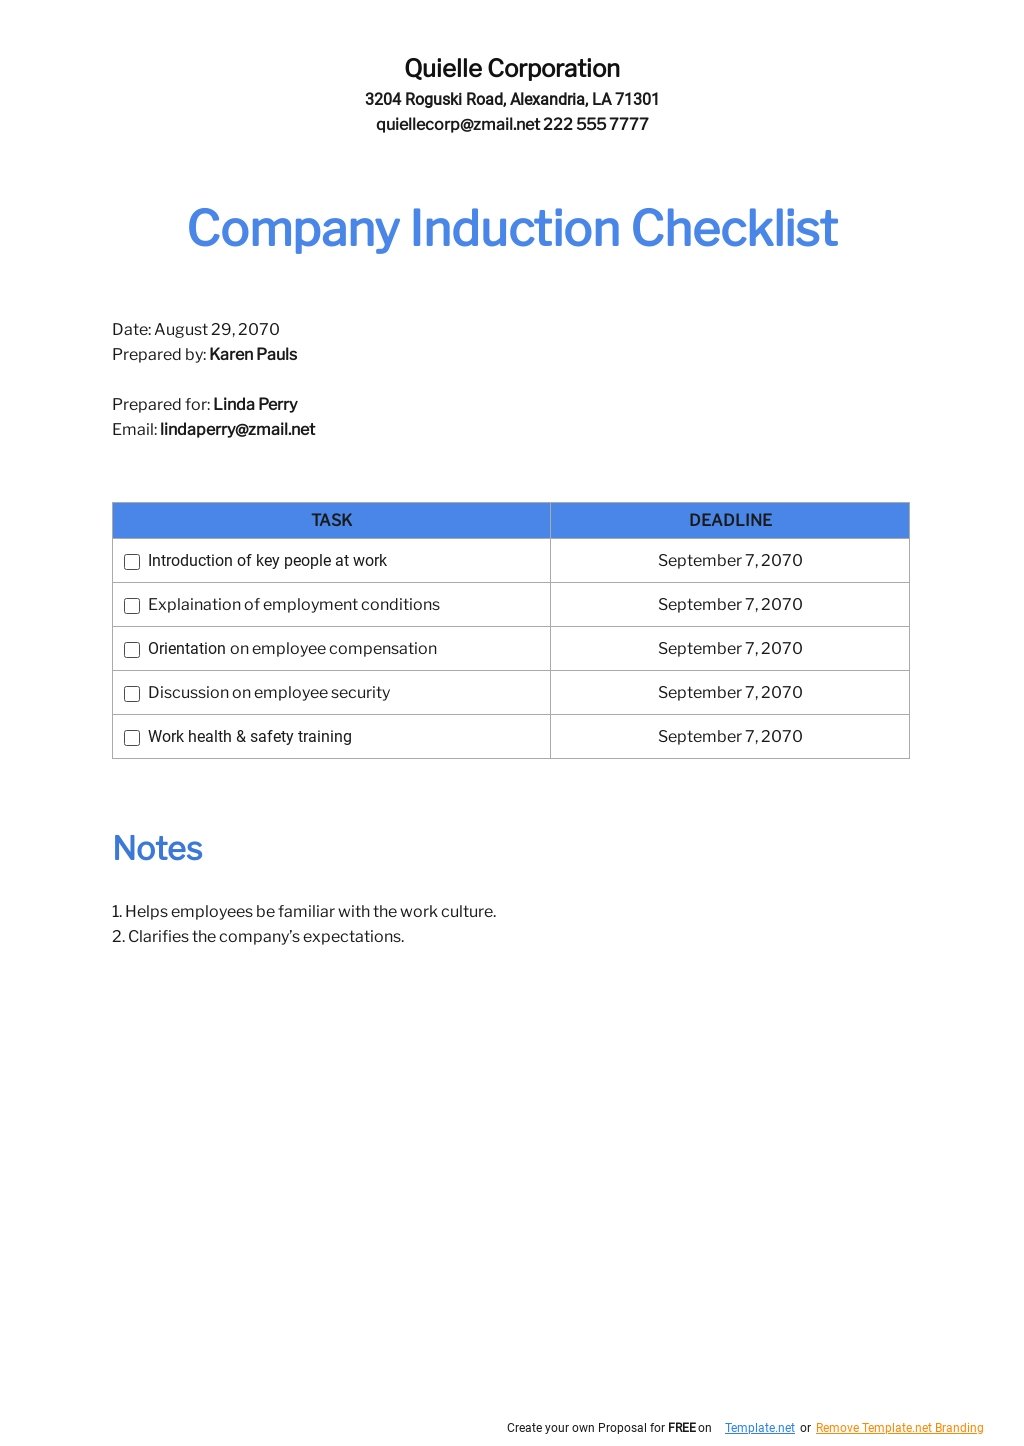 Company Induction Checklist Template